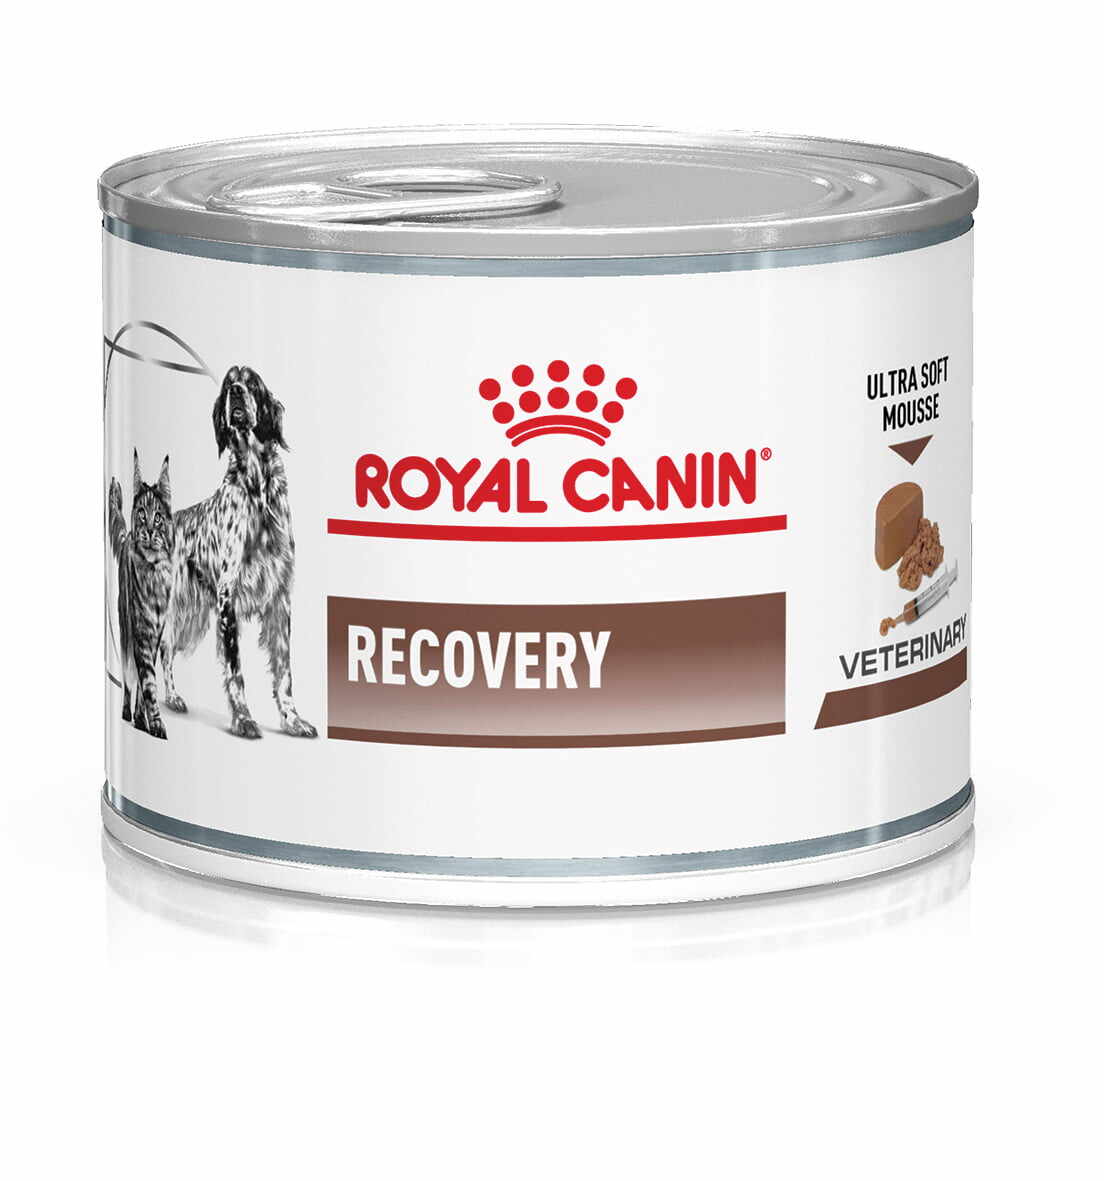 Royal Canin - Recovery for Dogs/Cats 195g